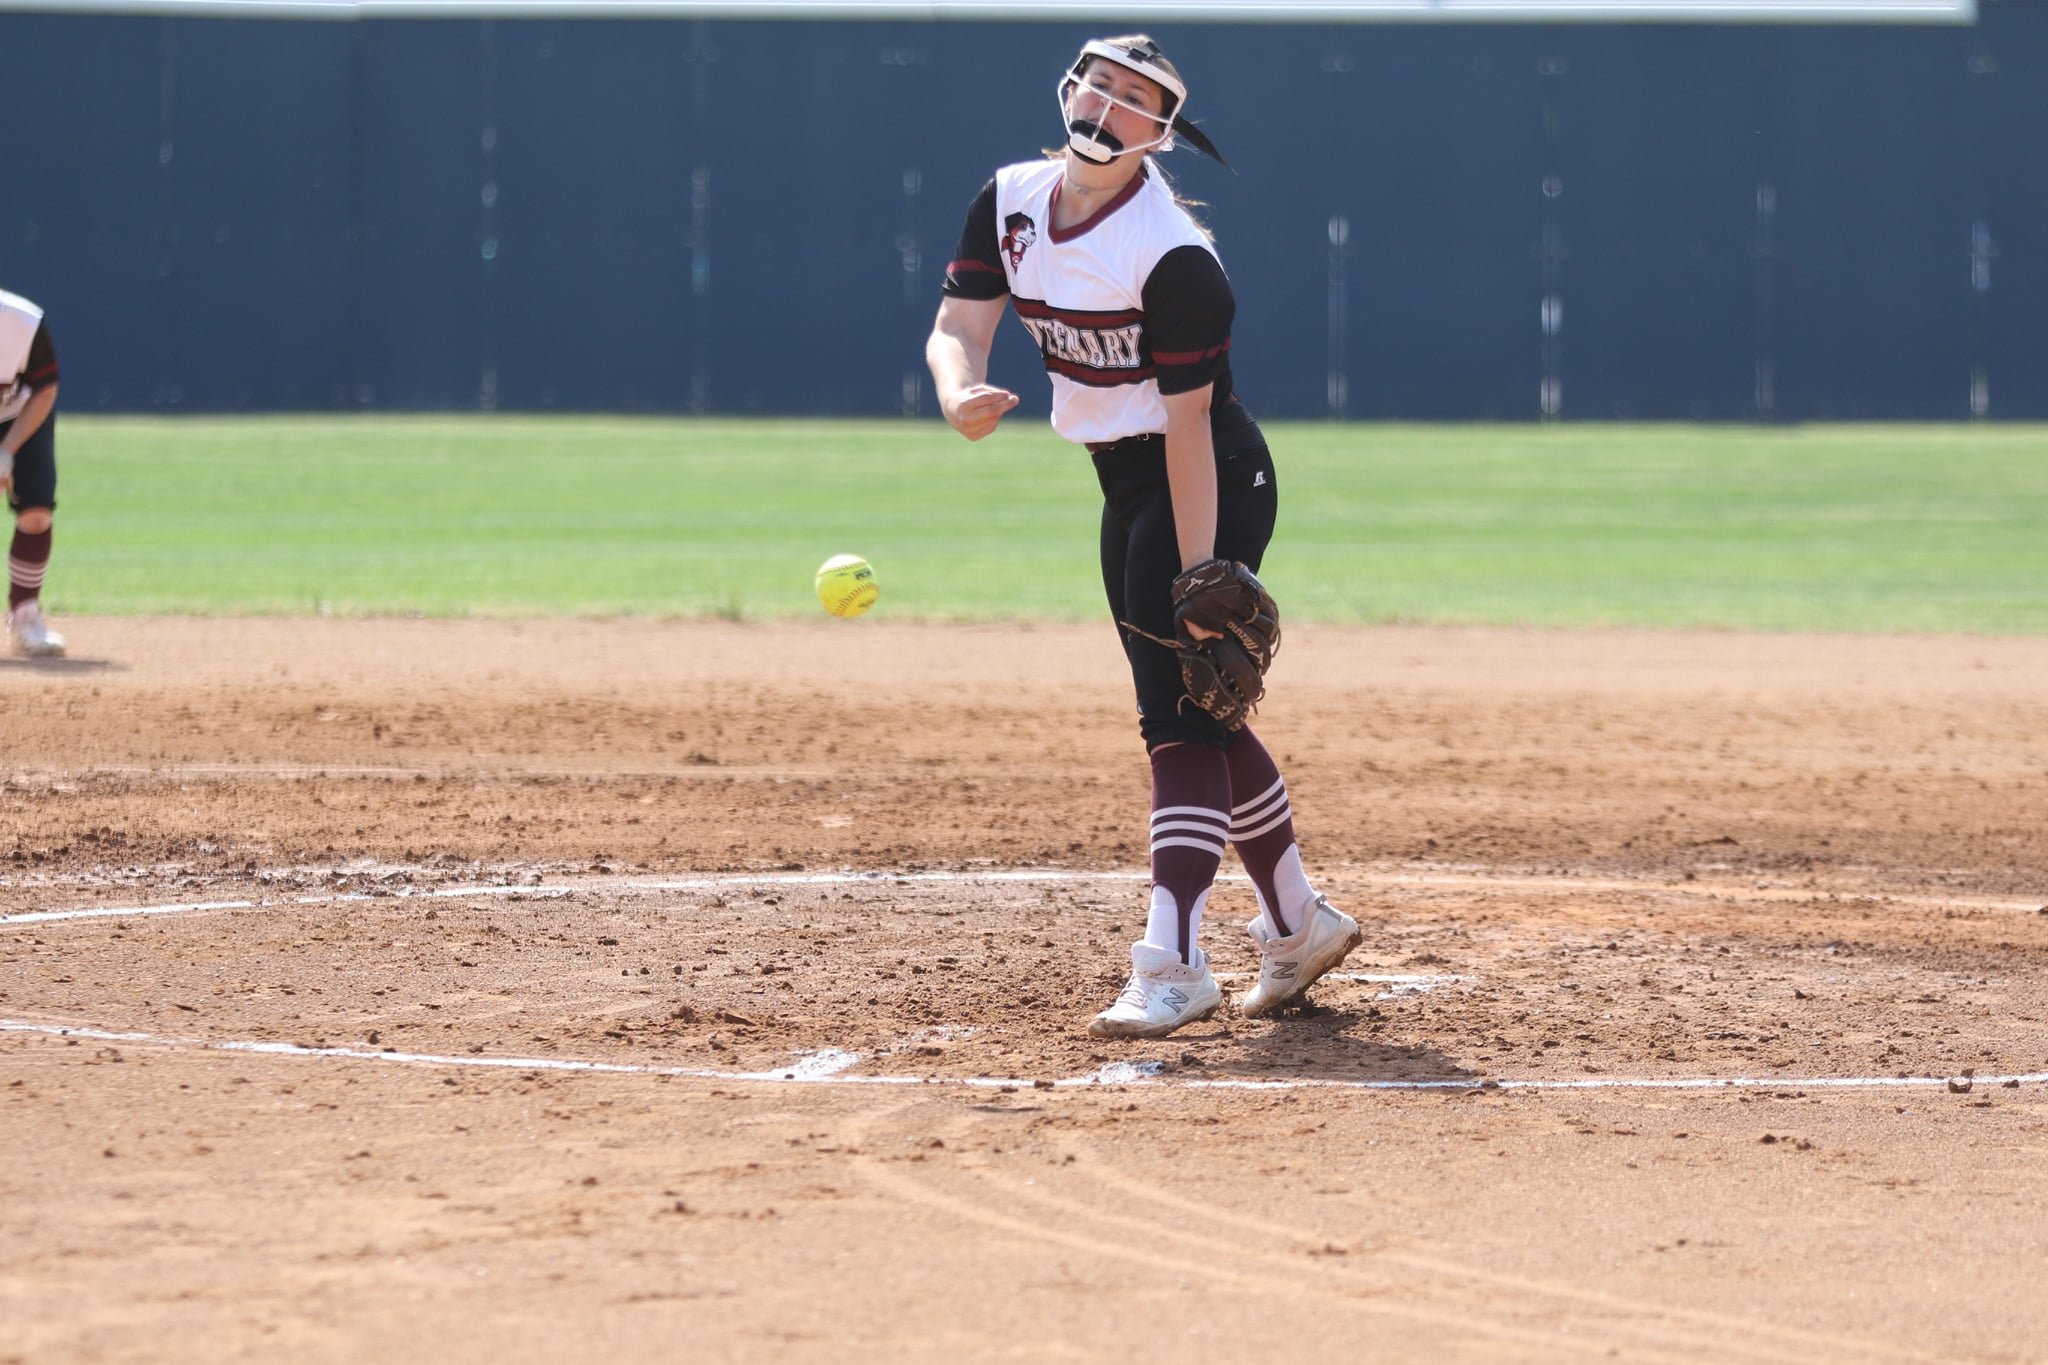 Junior P Anna Scarbrock and the Ladies fell twice to Millsaps on Friday to open the season.